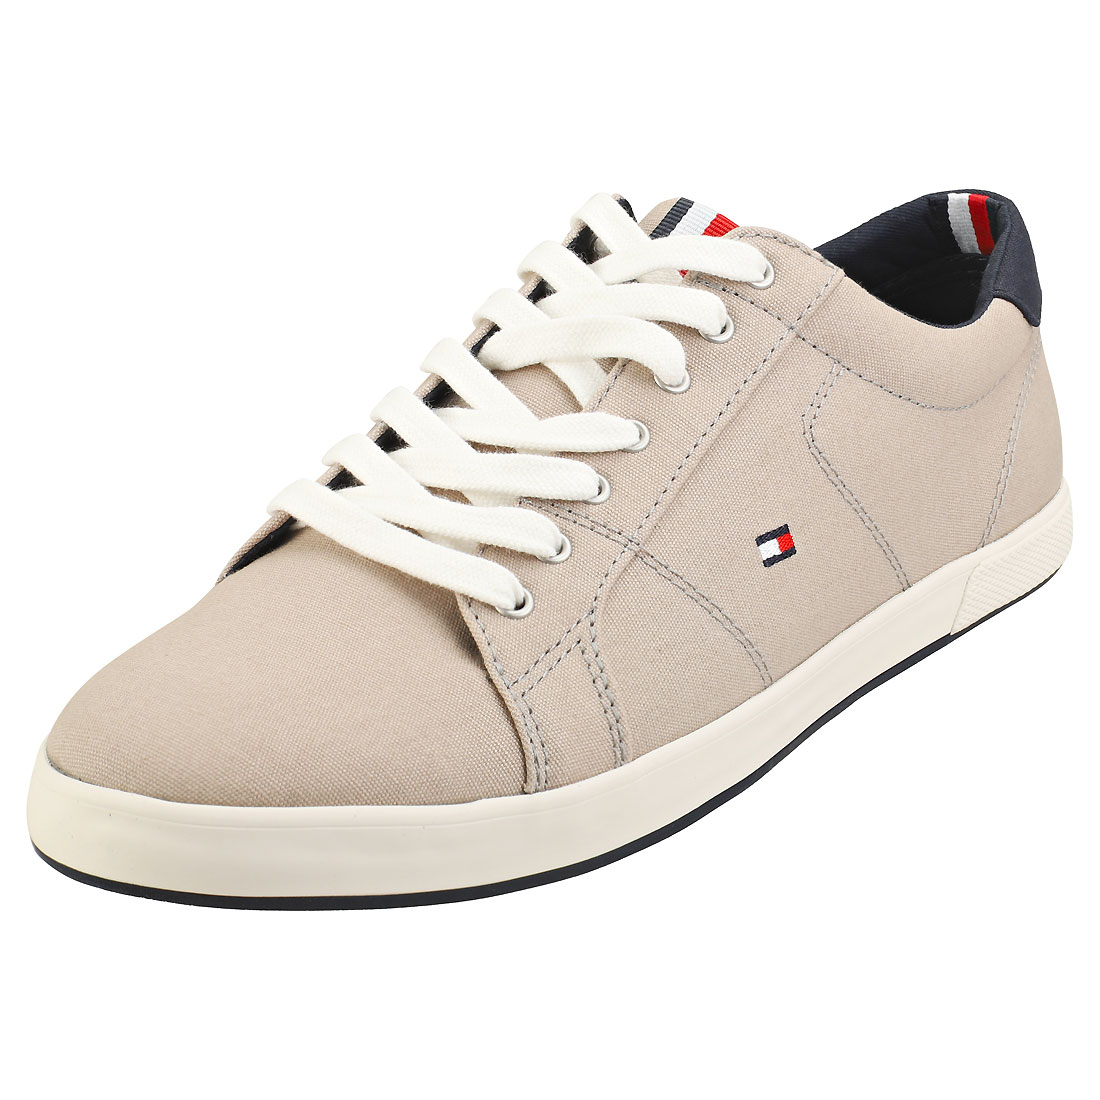 hilfiger iconic sneaker